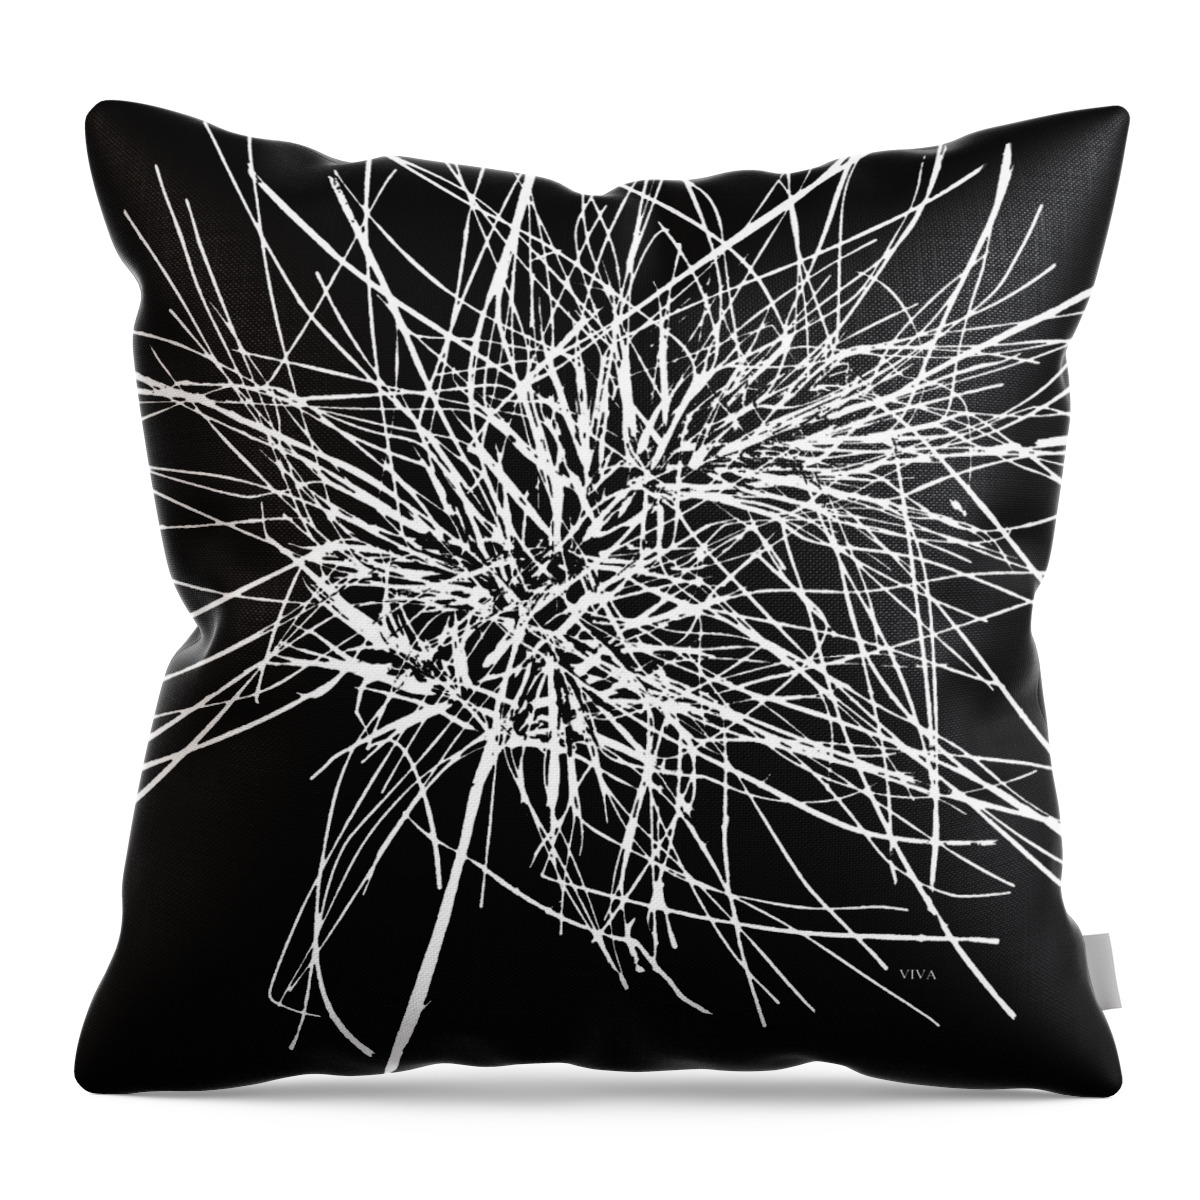 Viva Throw Pillow featuring the photograph Tumbleweed On Black by VIVA Anderson